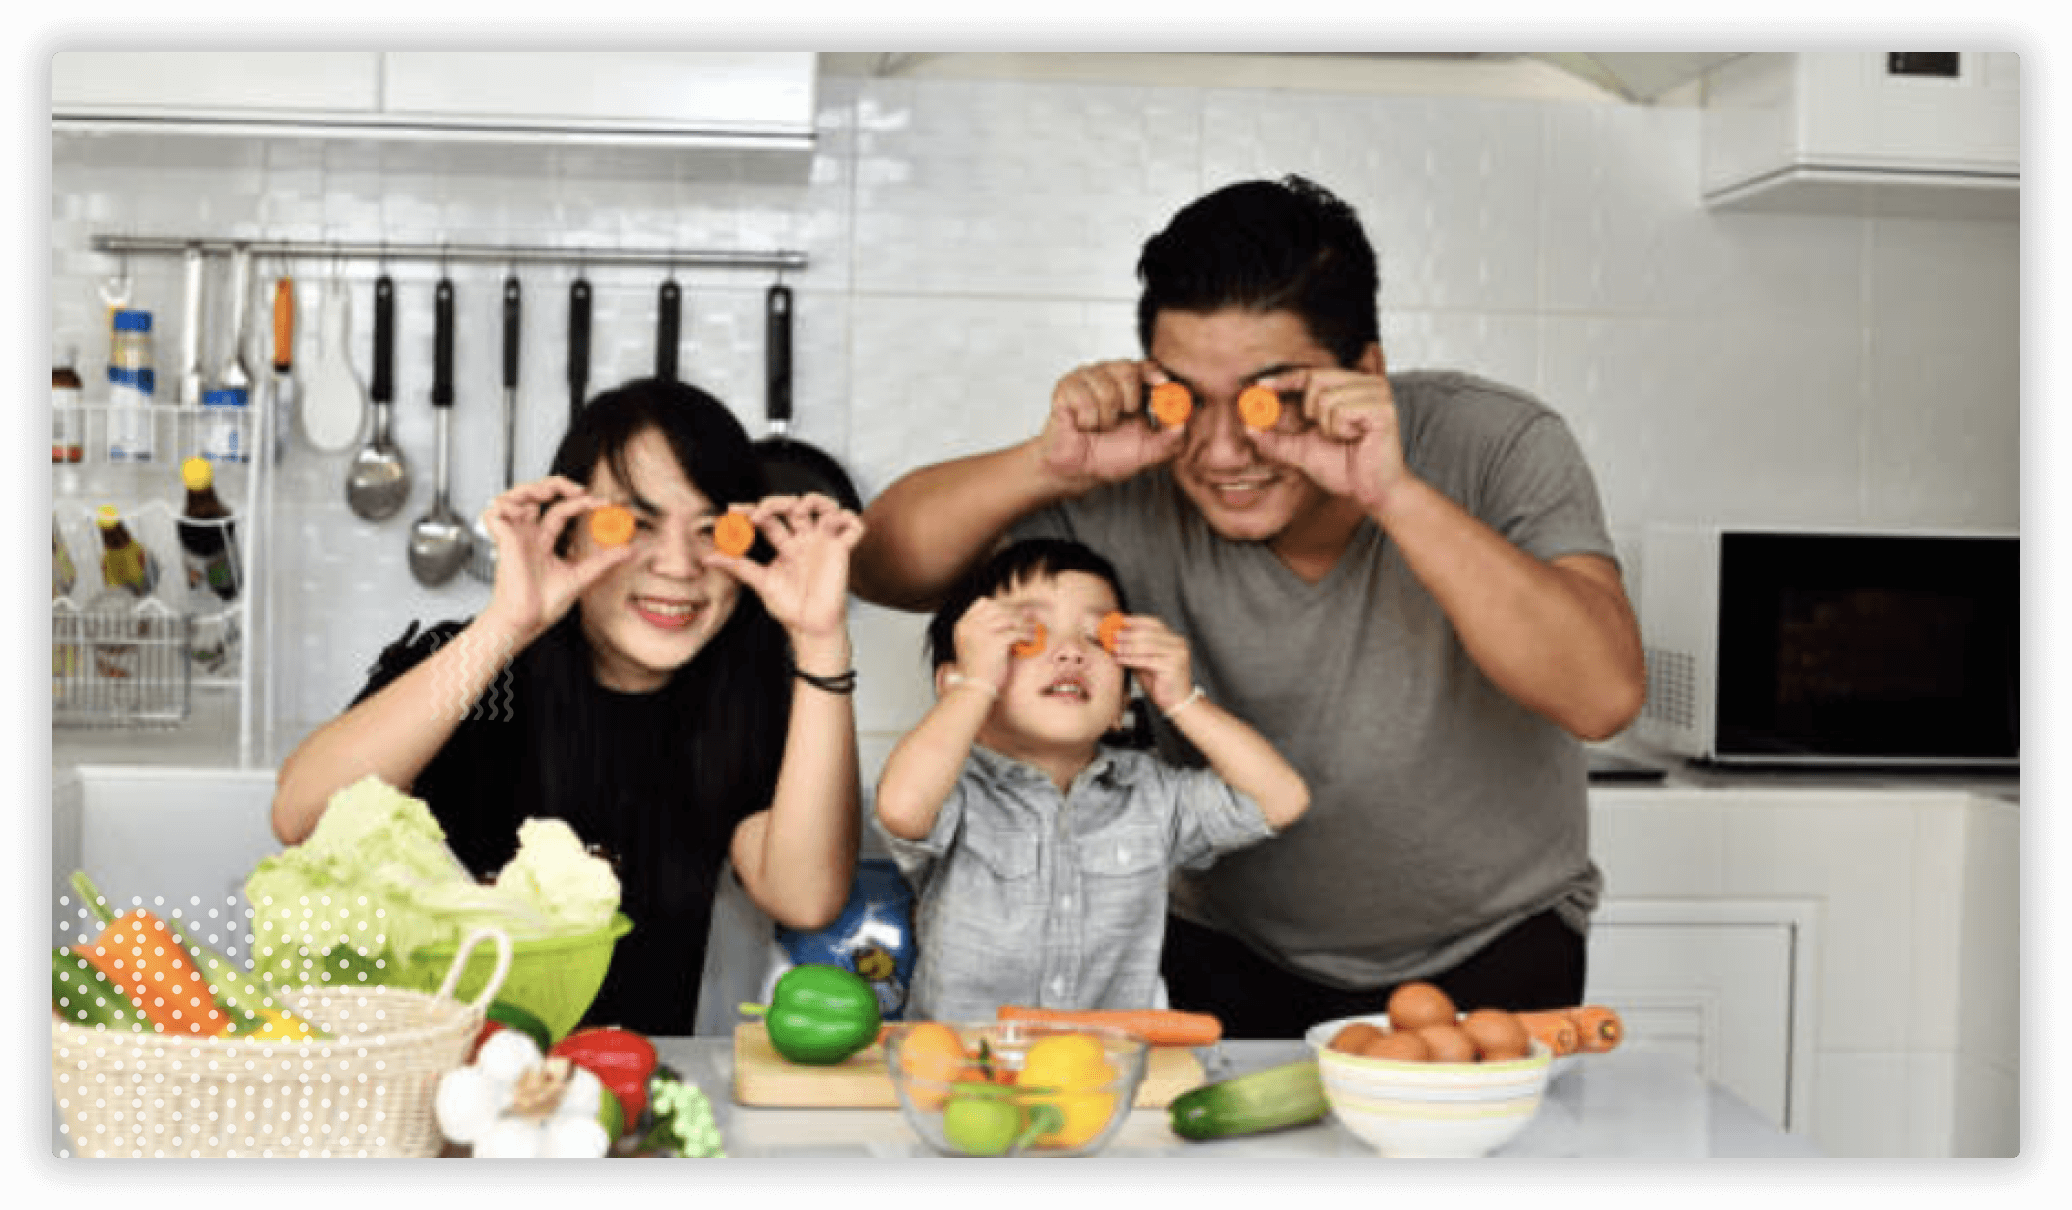 Learn and pick up useful tips to make family mealtimes less stressful and more enjoyable!